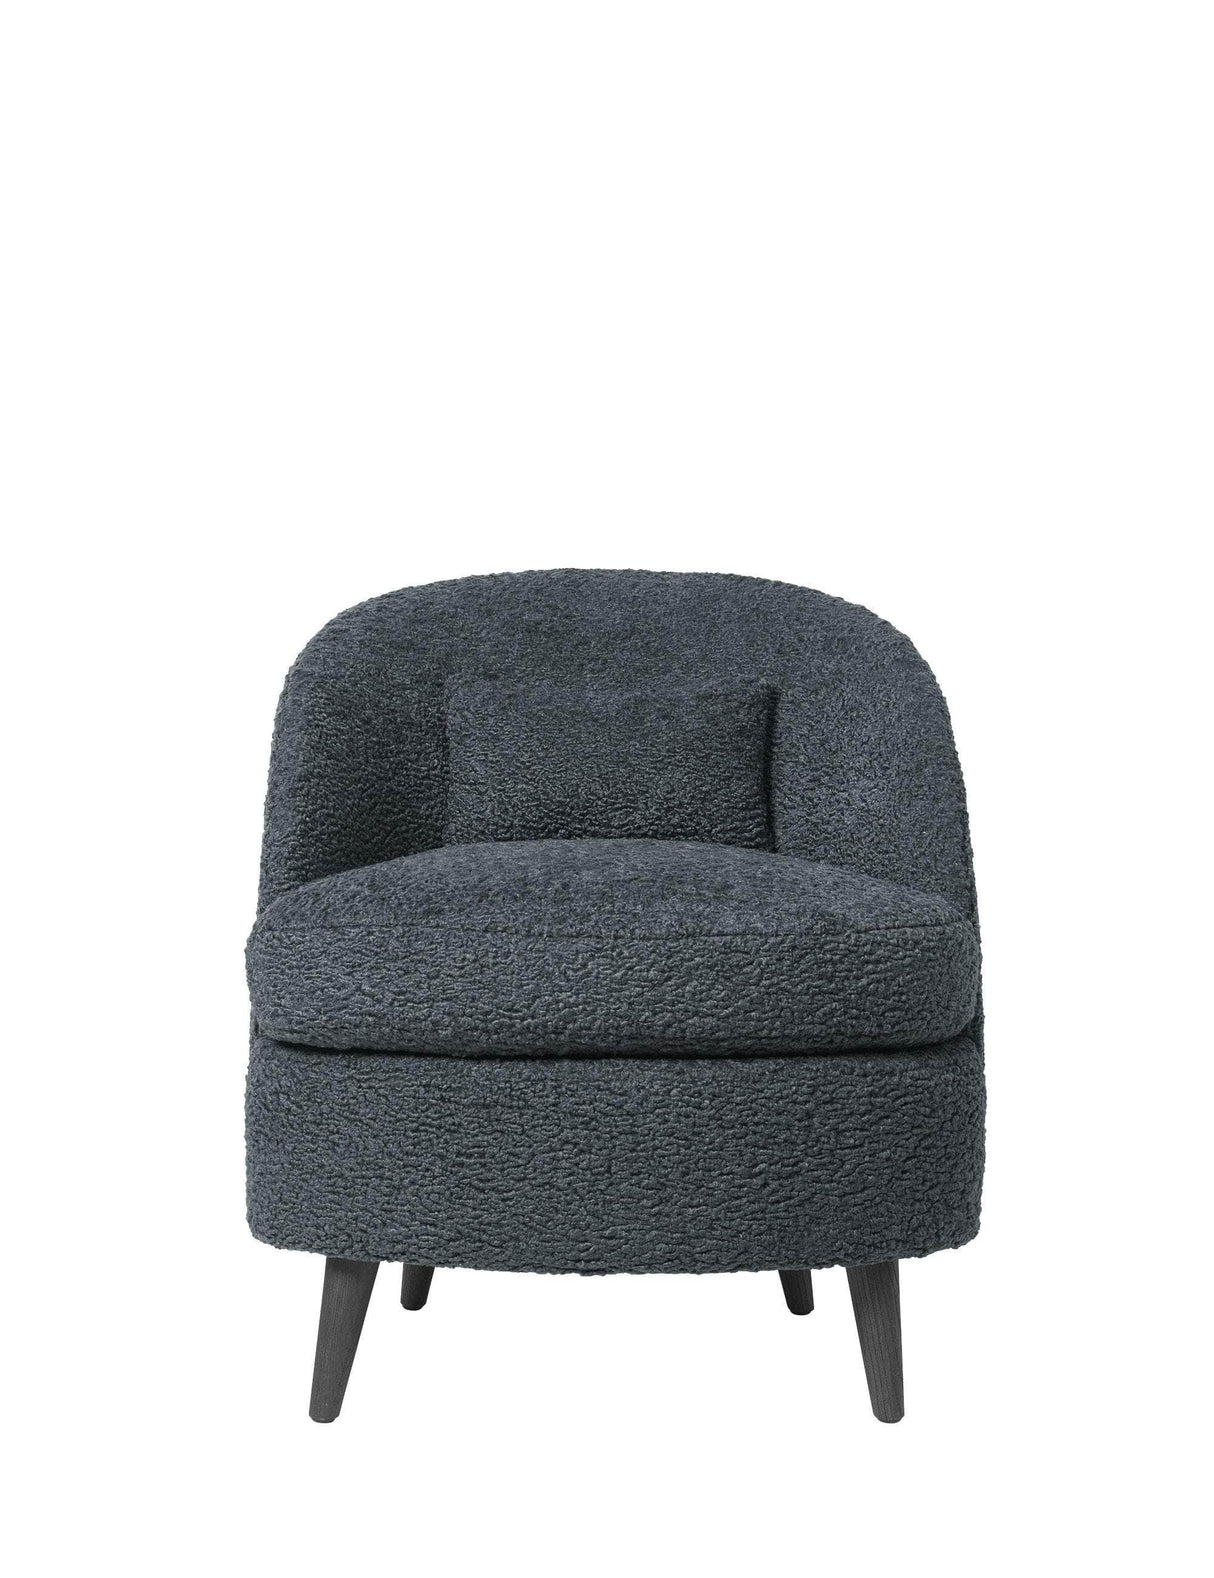 Cozy Living Andrea Lounge Chair - CHARCOAL (FR)